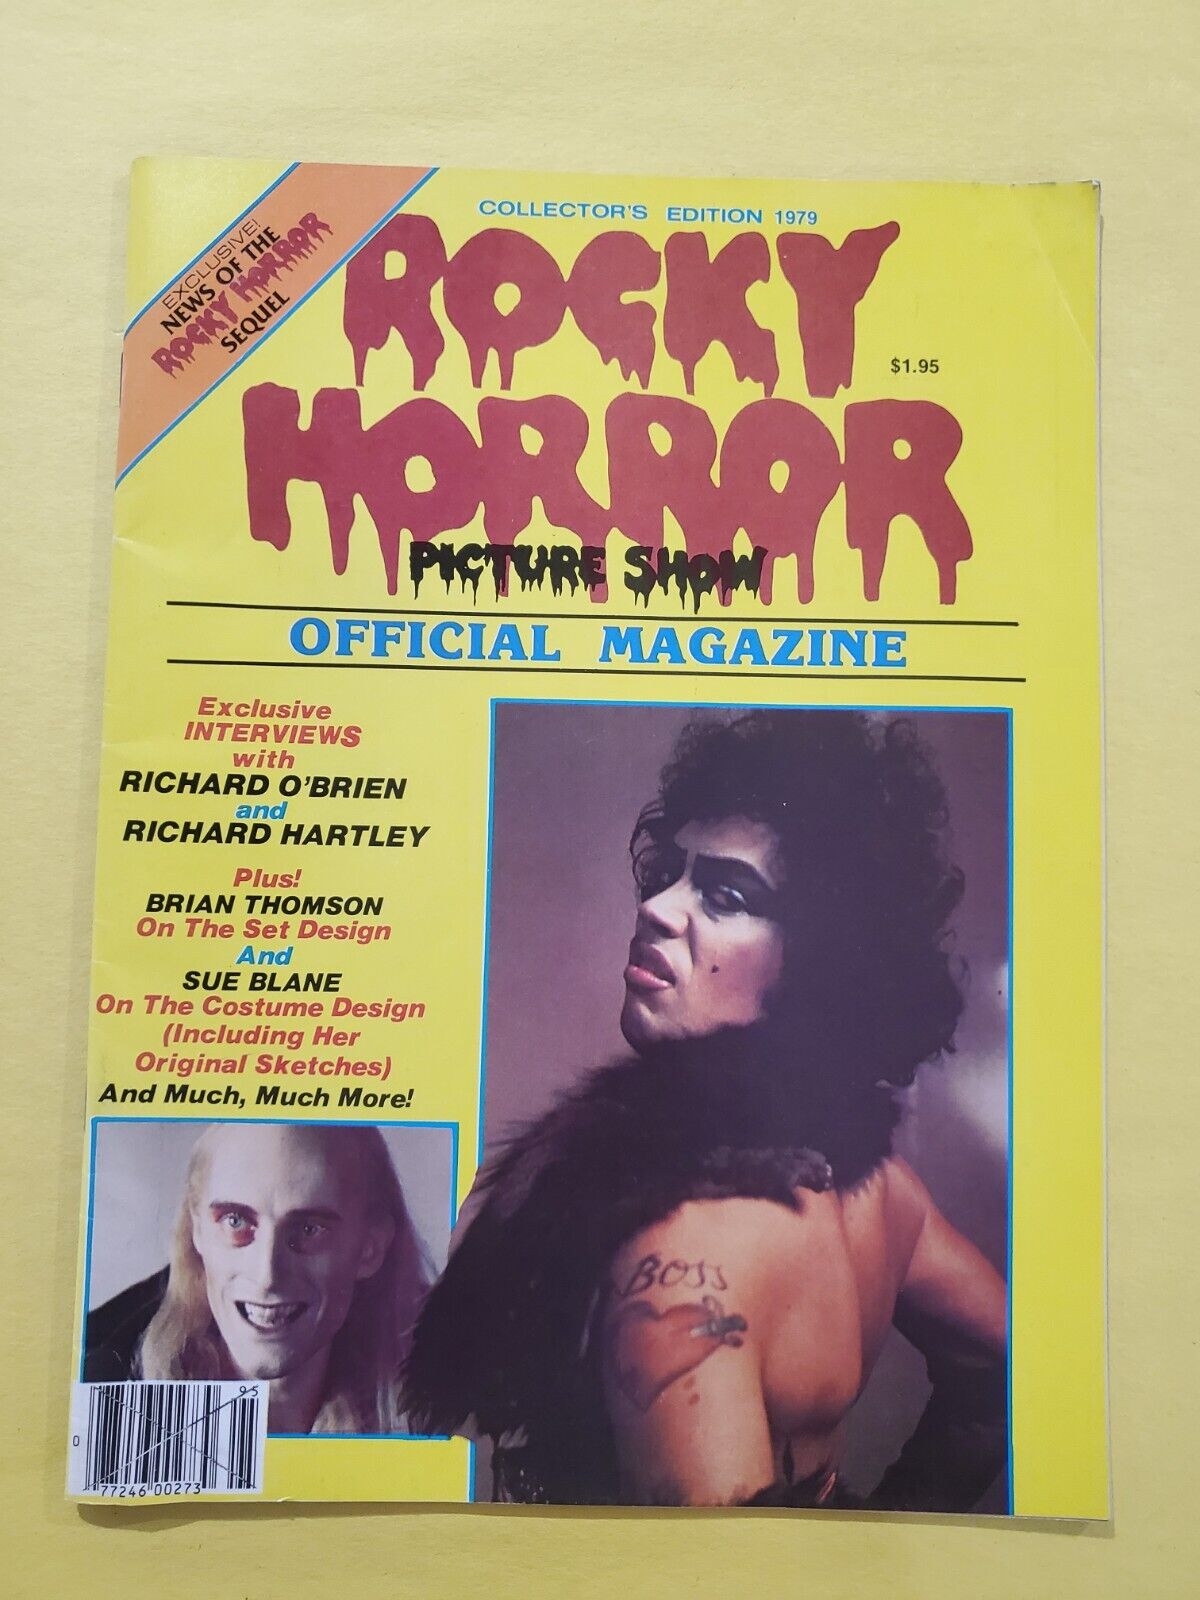 VINTAGE 1979 The Rocky Horror Picture Show OFFICIAL MAGAZINE